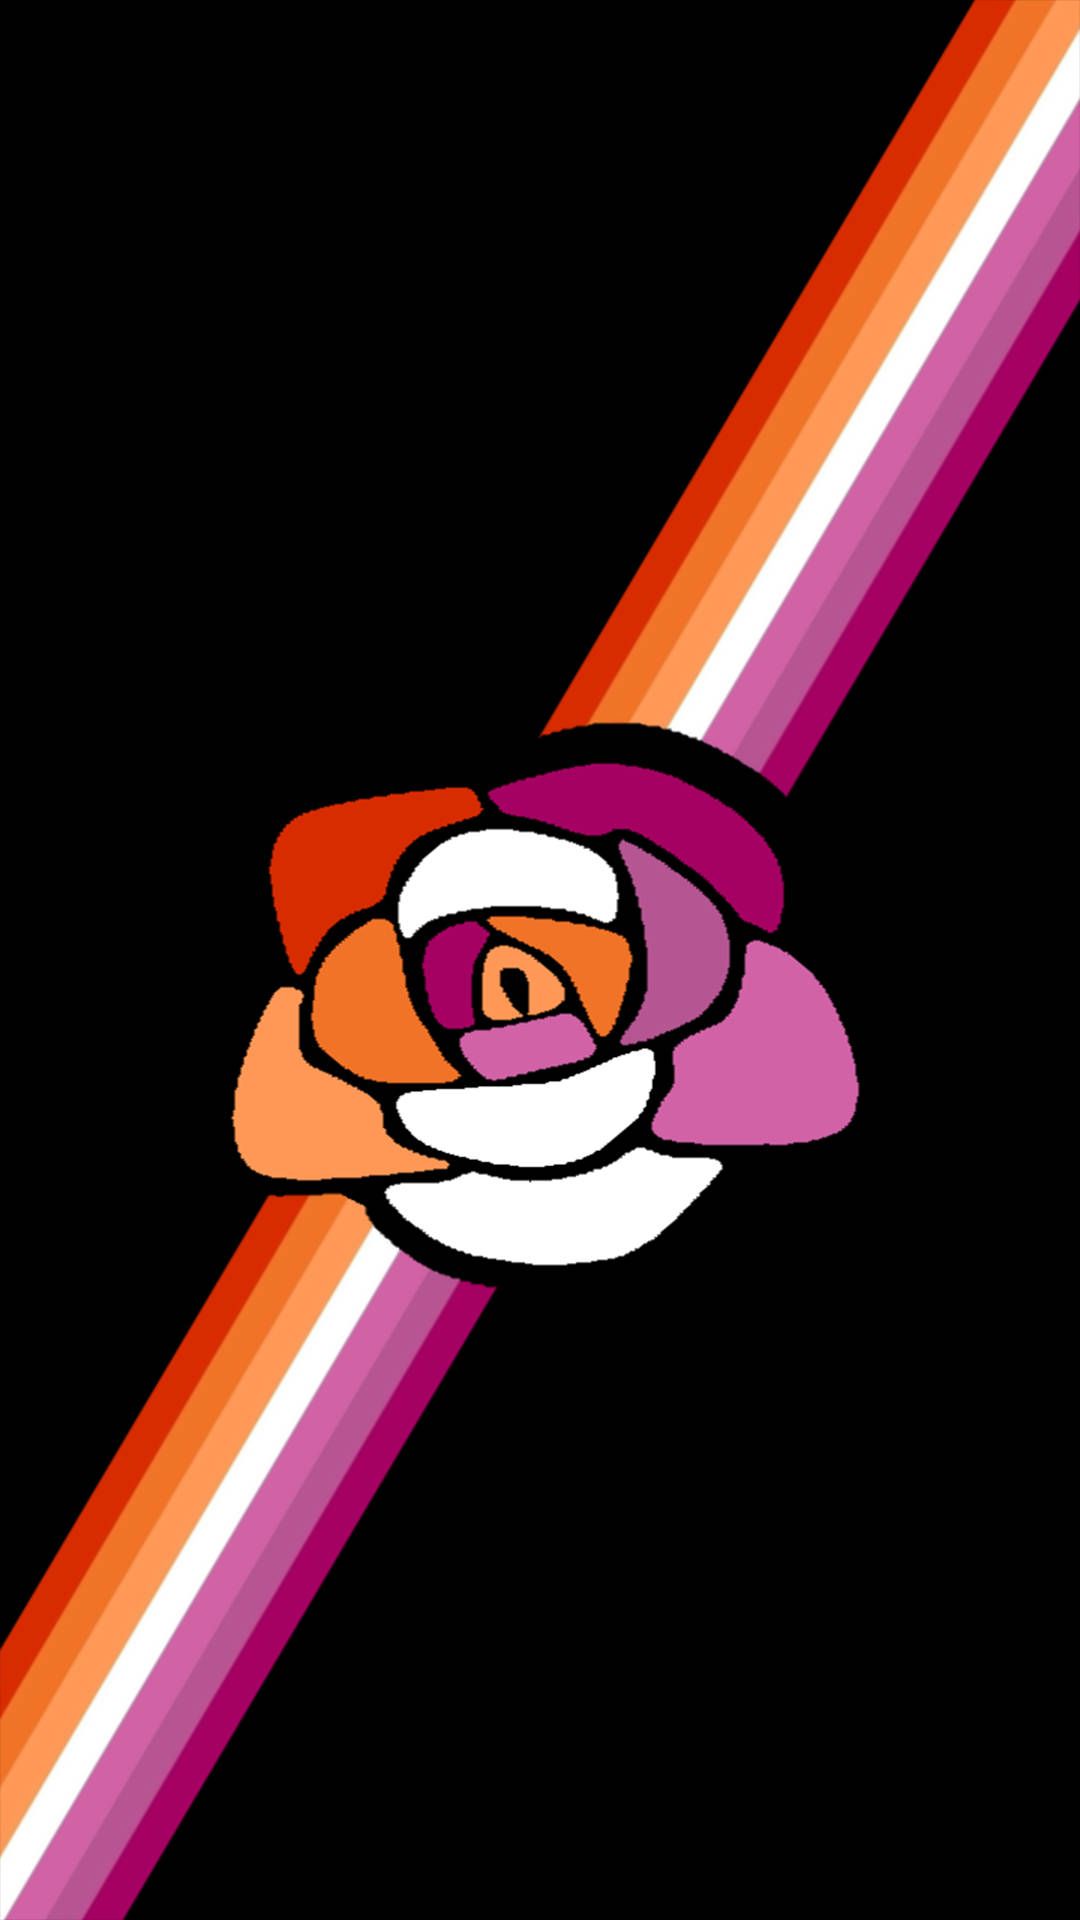 A flower with stripes on it is shown - LGBT, lesbian